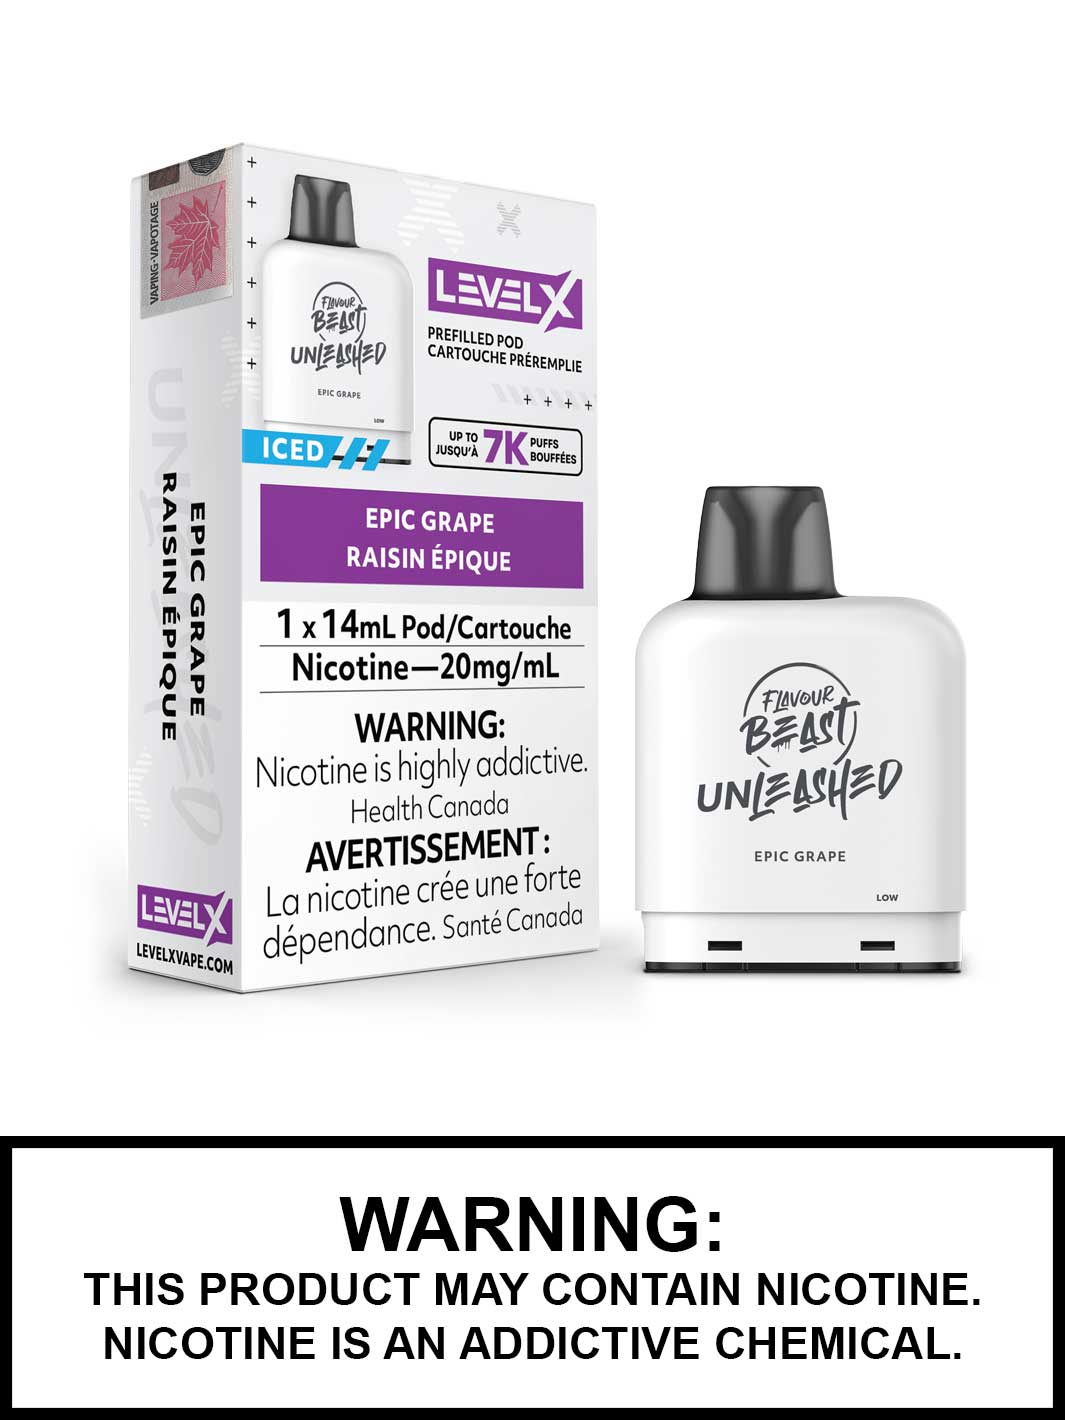 Epic Grape Iced Level X Flavour Beast Unleashed Pods, Vape360 Canada